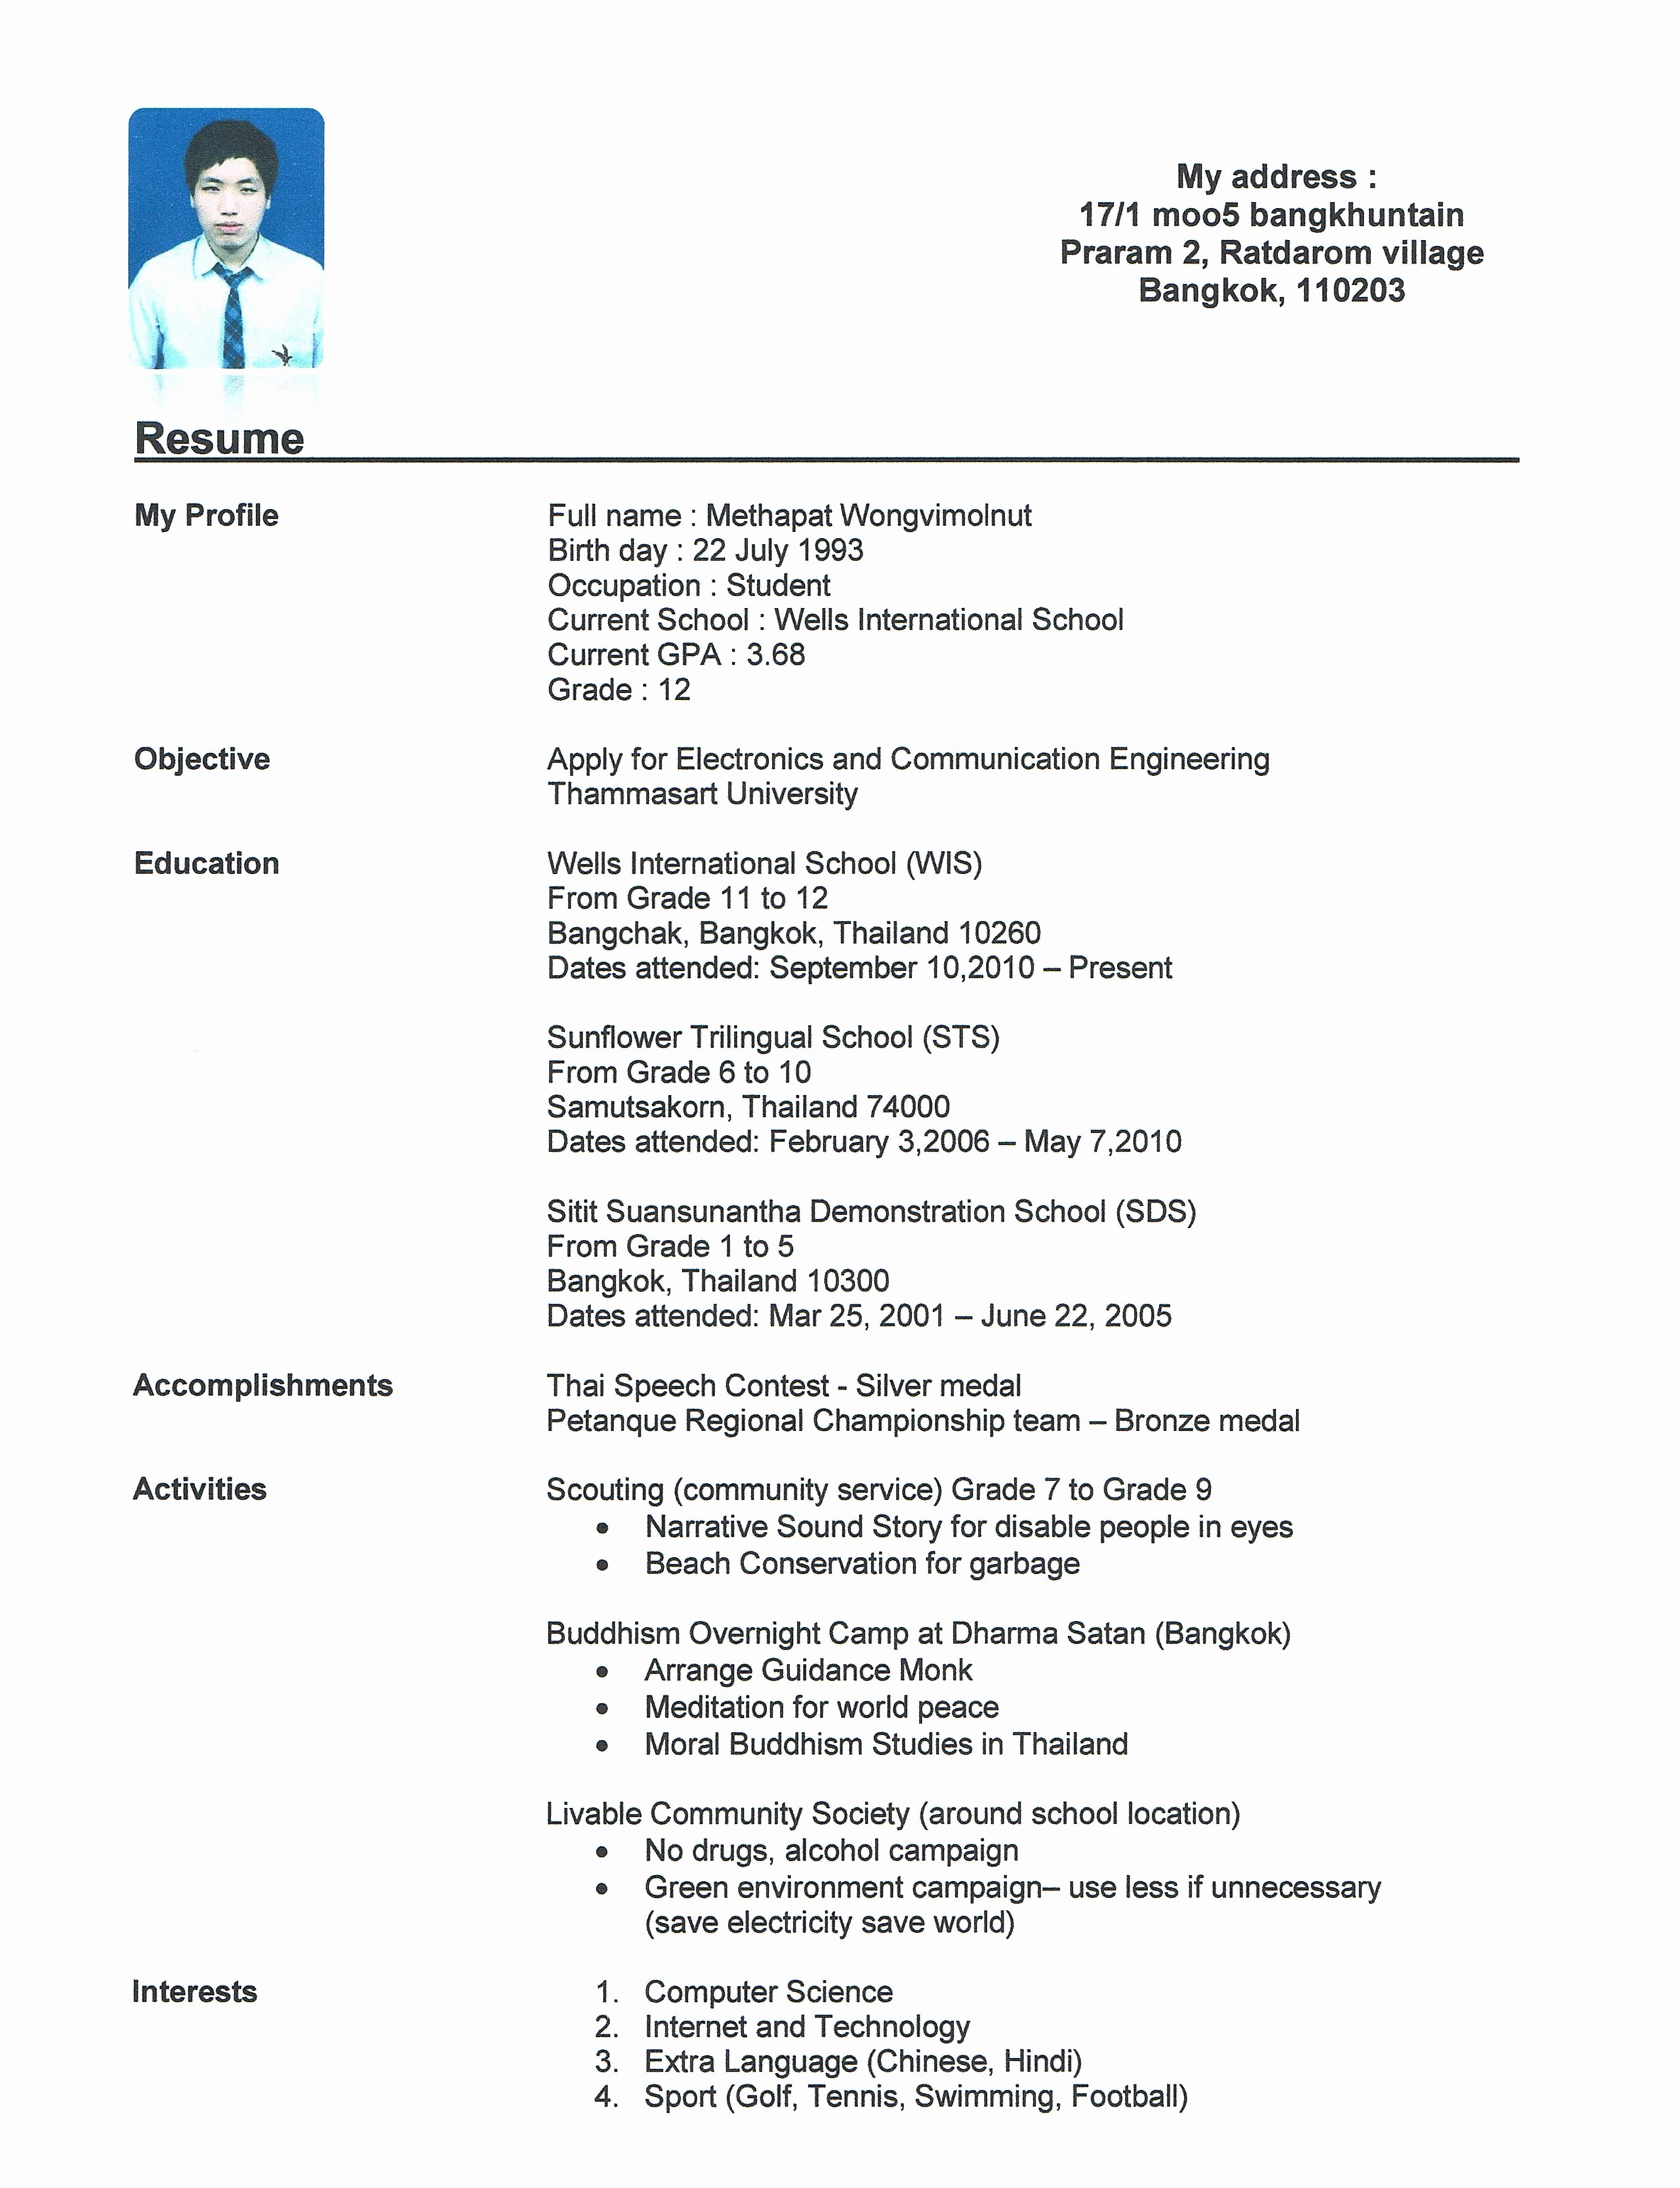 Resume Examples for Highschool Students Fresh My Resume